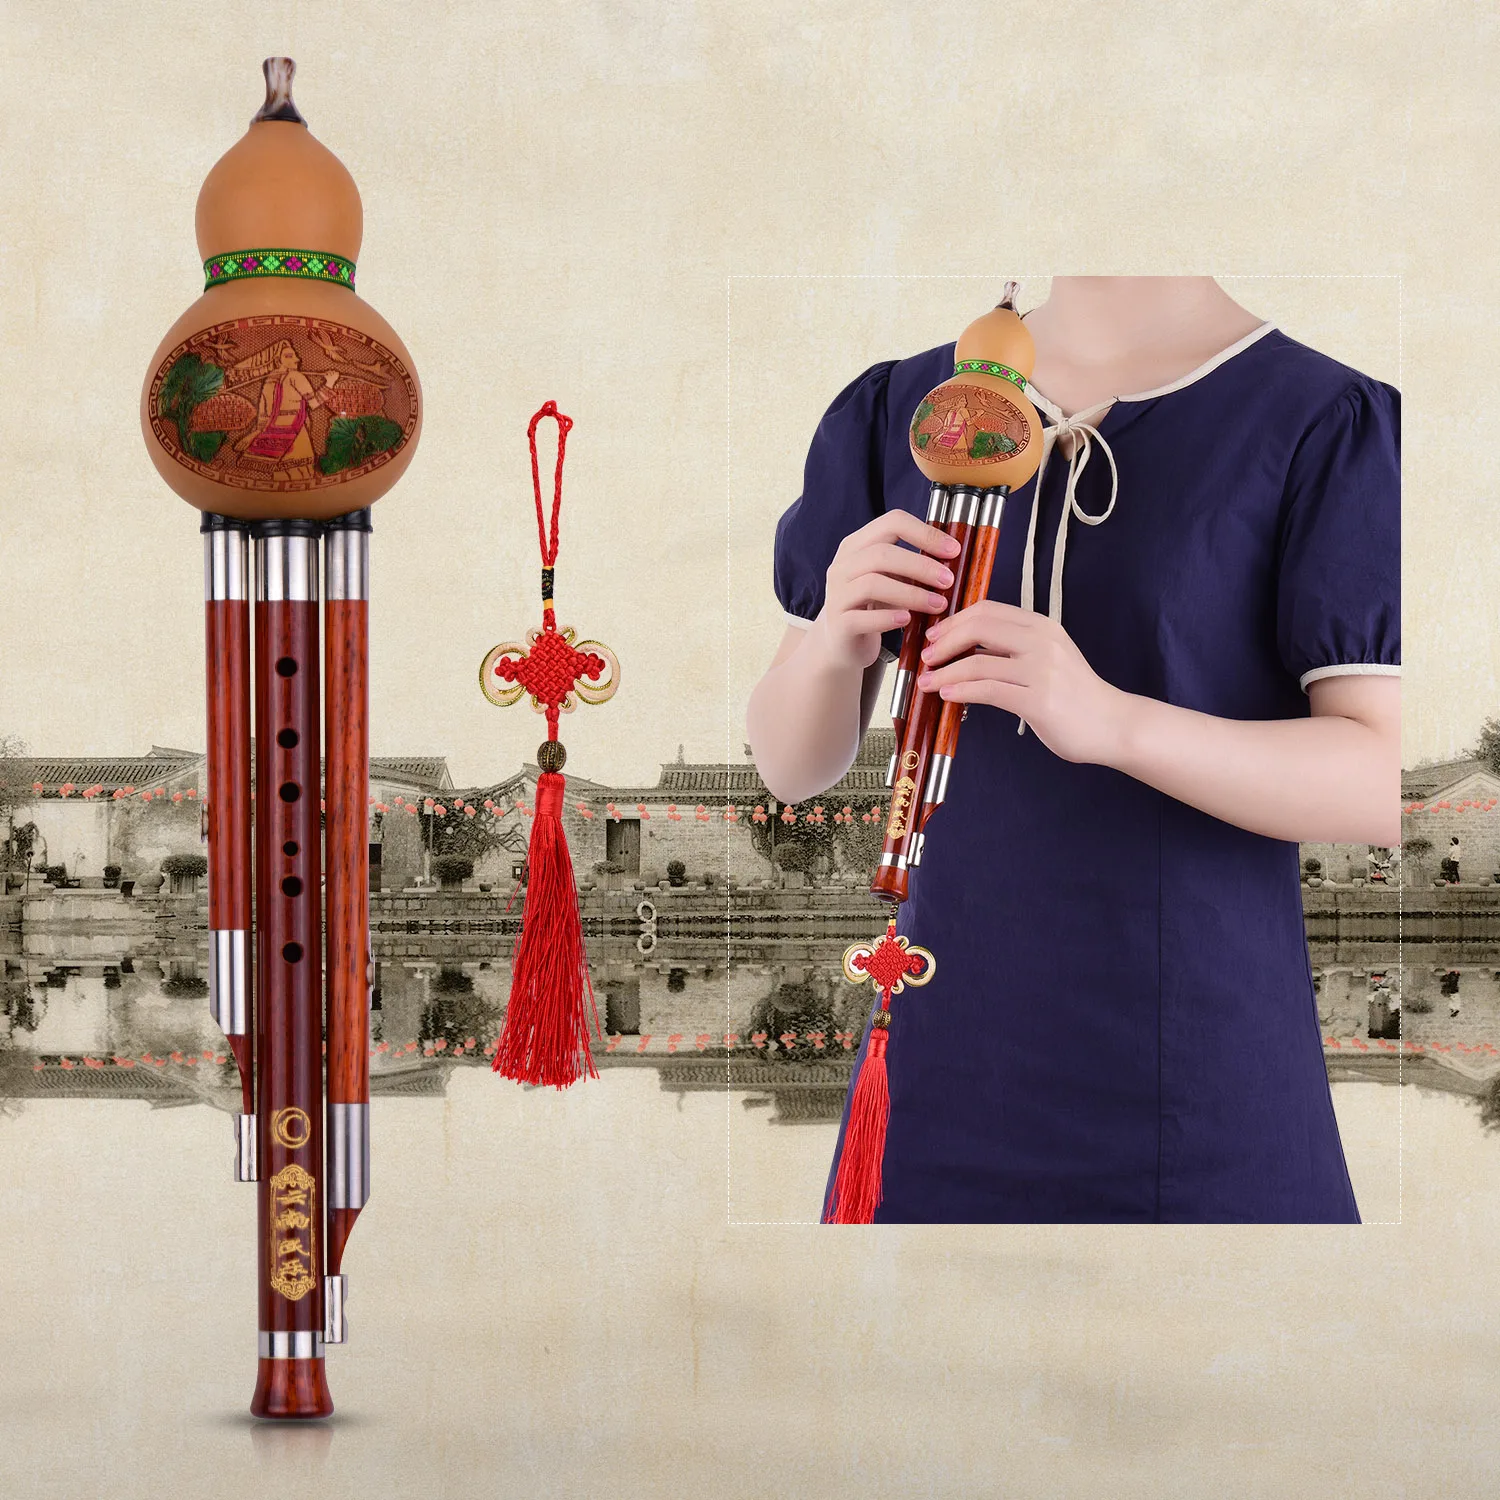 

3 Tone C-Key Hulusi Gourd Cucurbit Flute Solid Wood Pipes Chinese Traditional Instrument with Chinese Knot Carry Case